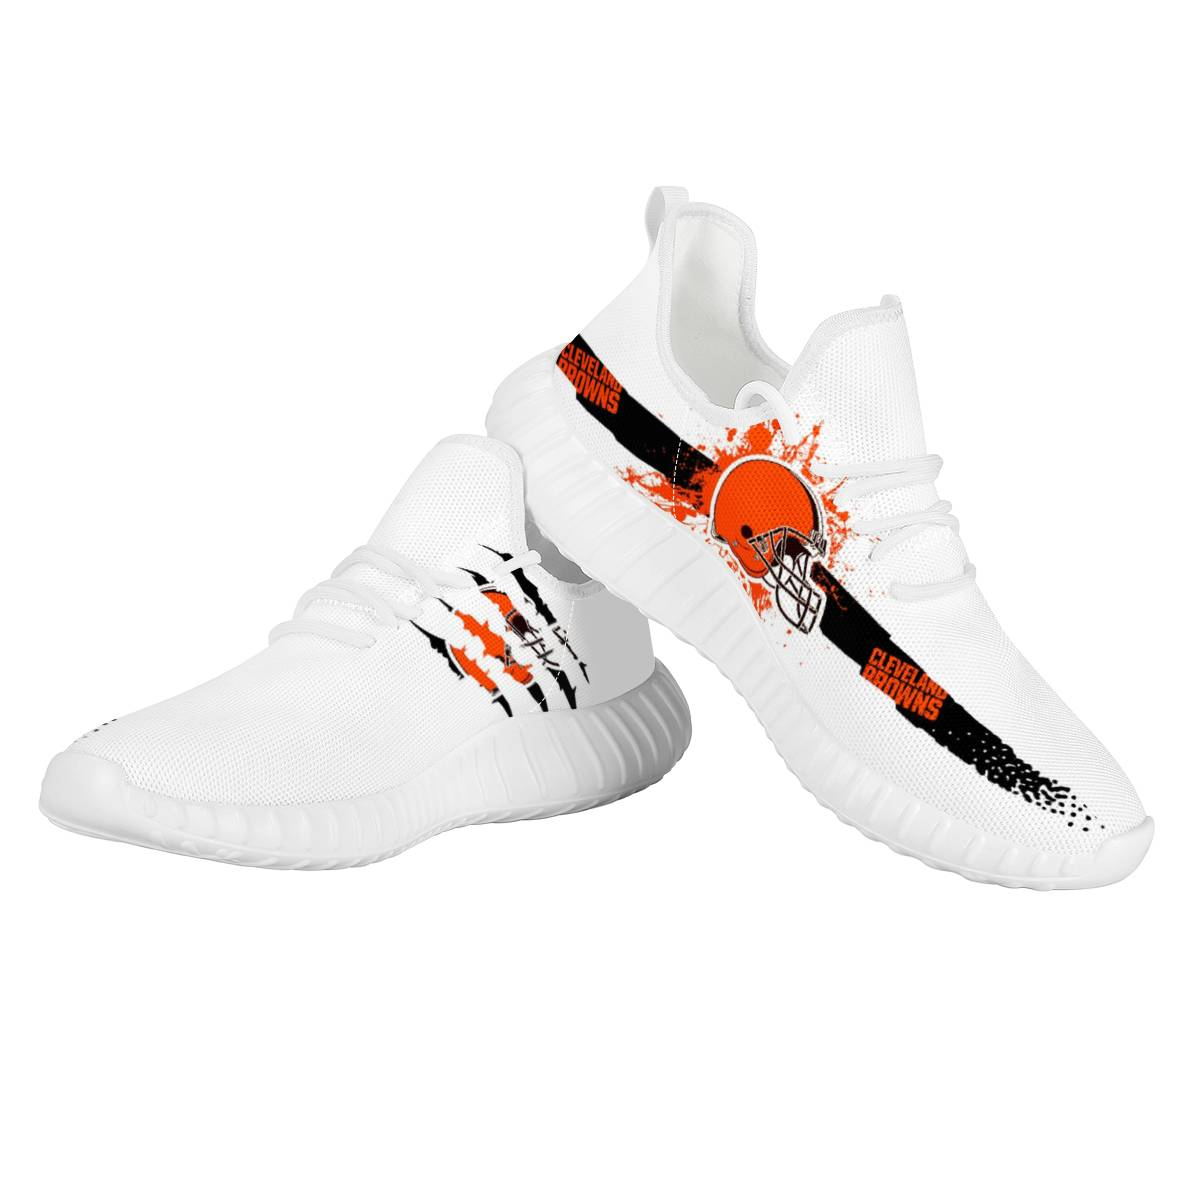 Men's Cleveland Browns Mesh Knit Sneakers/Shoes 007